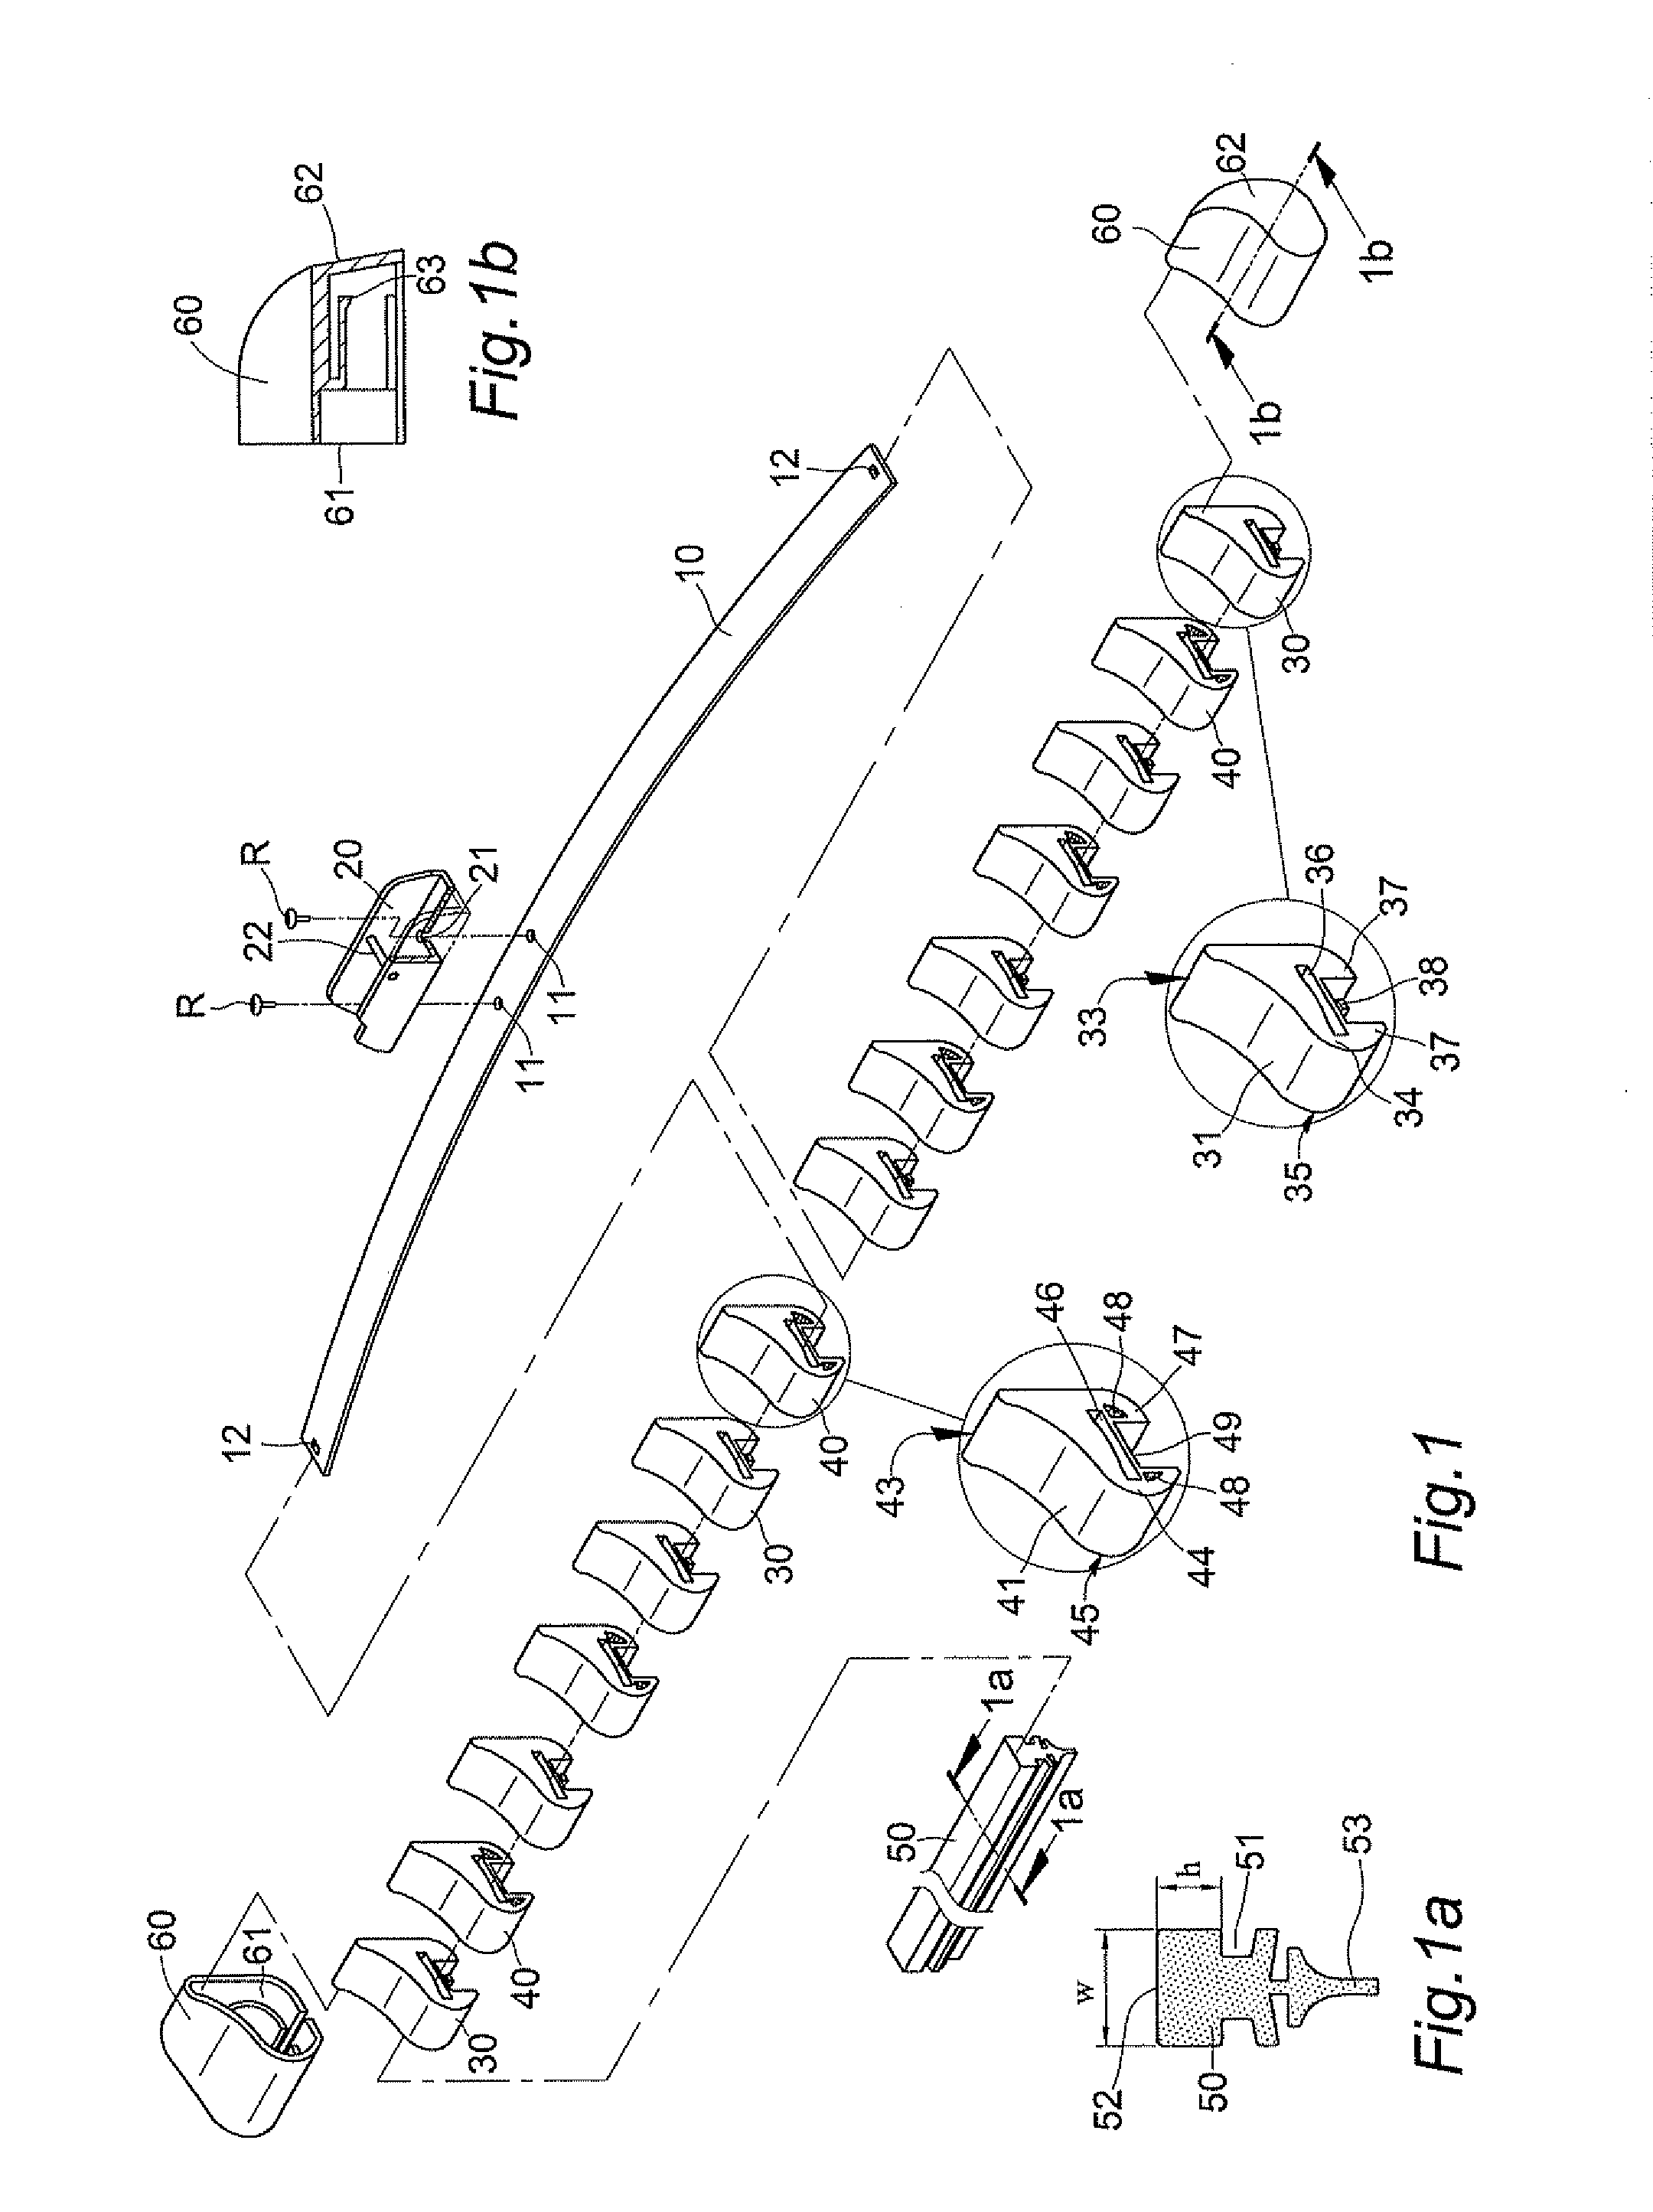 Structure for array combinational type of windshield wiper